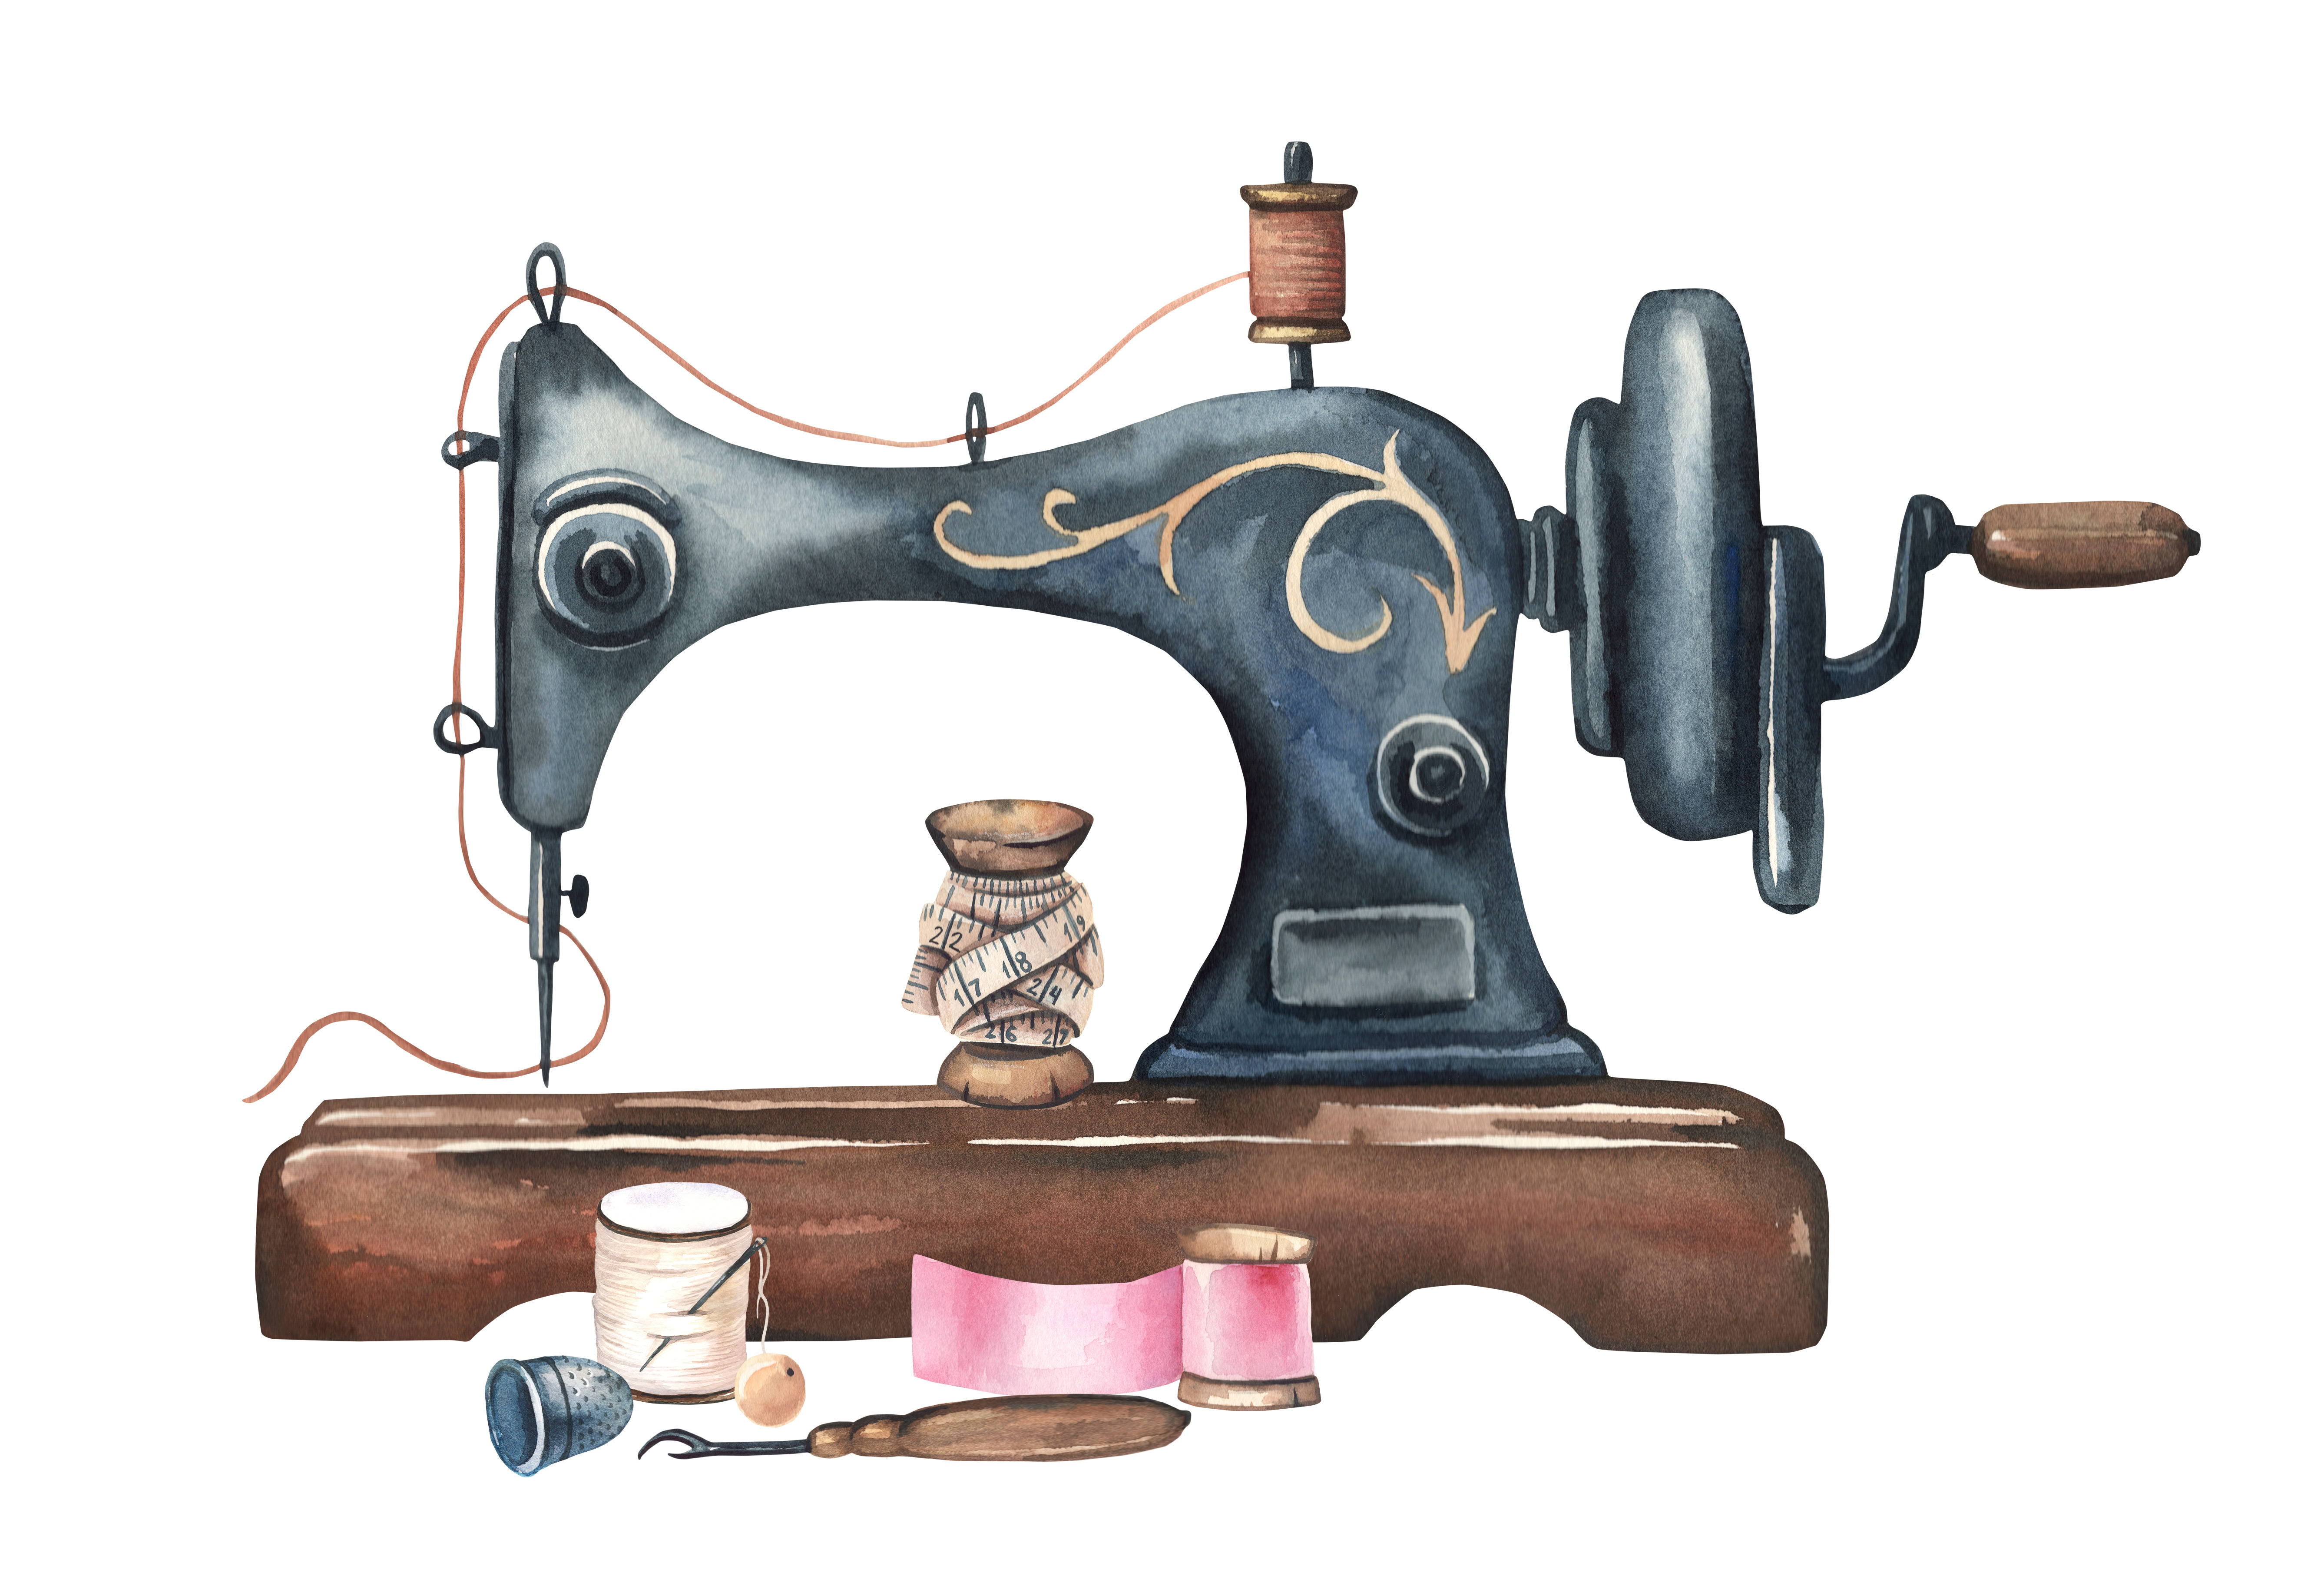 Illustrated sewing machine with thread, ribbon, and stitch ripper.